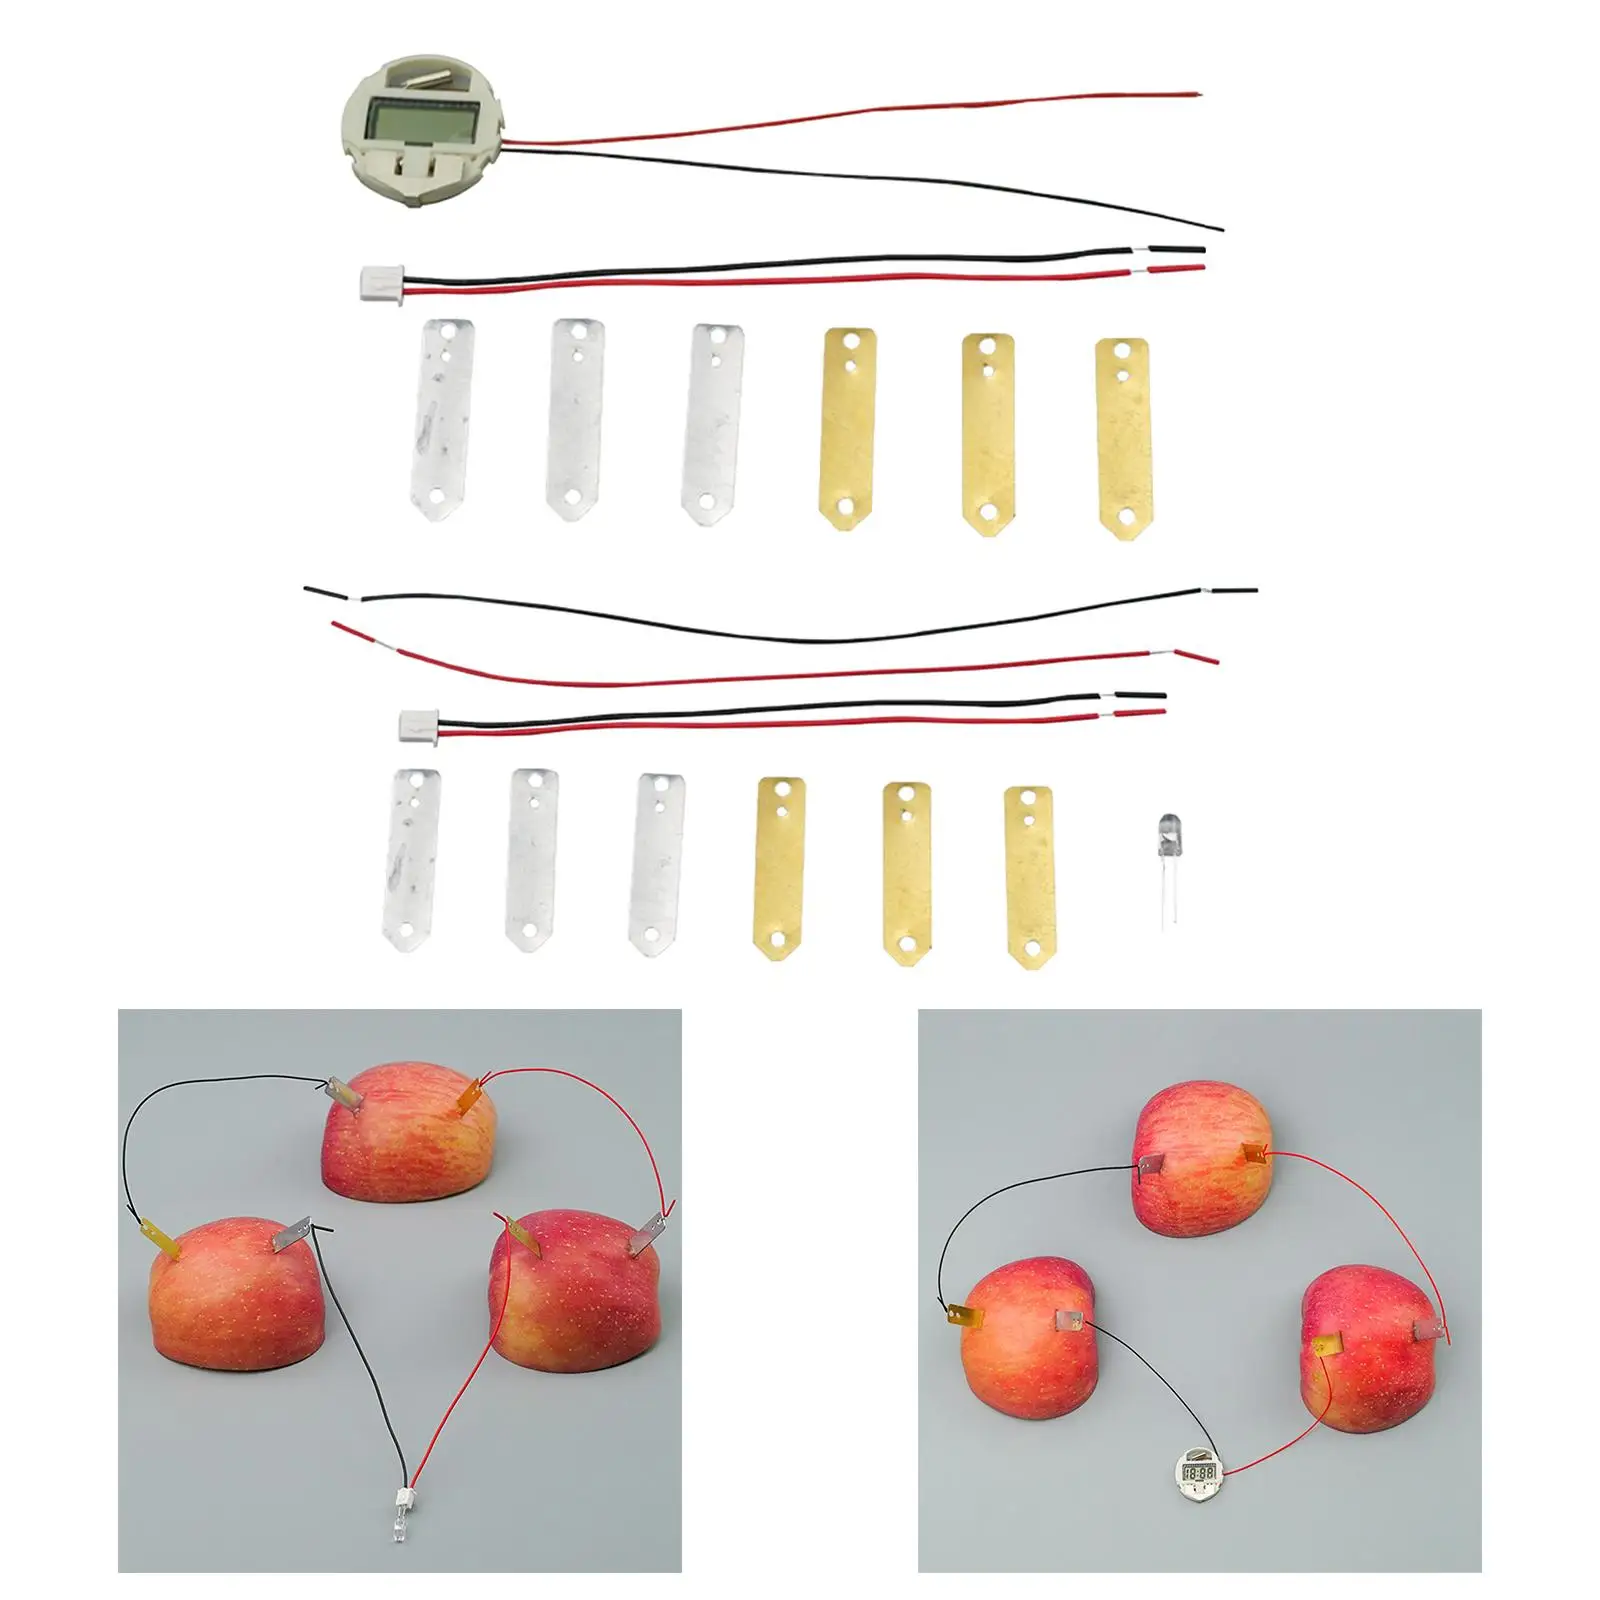 DIY Fruit Battery Diy Energy Kits Potato Electricity Experiments Toys for Kids Toddlers Preschool Children Birthday Gifts